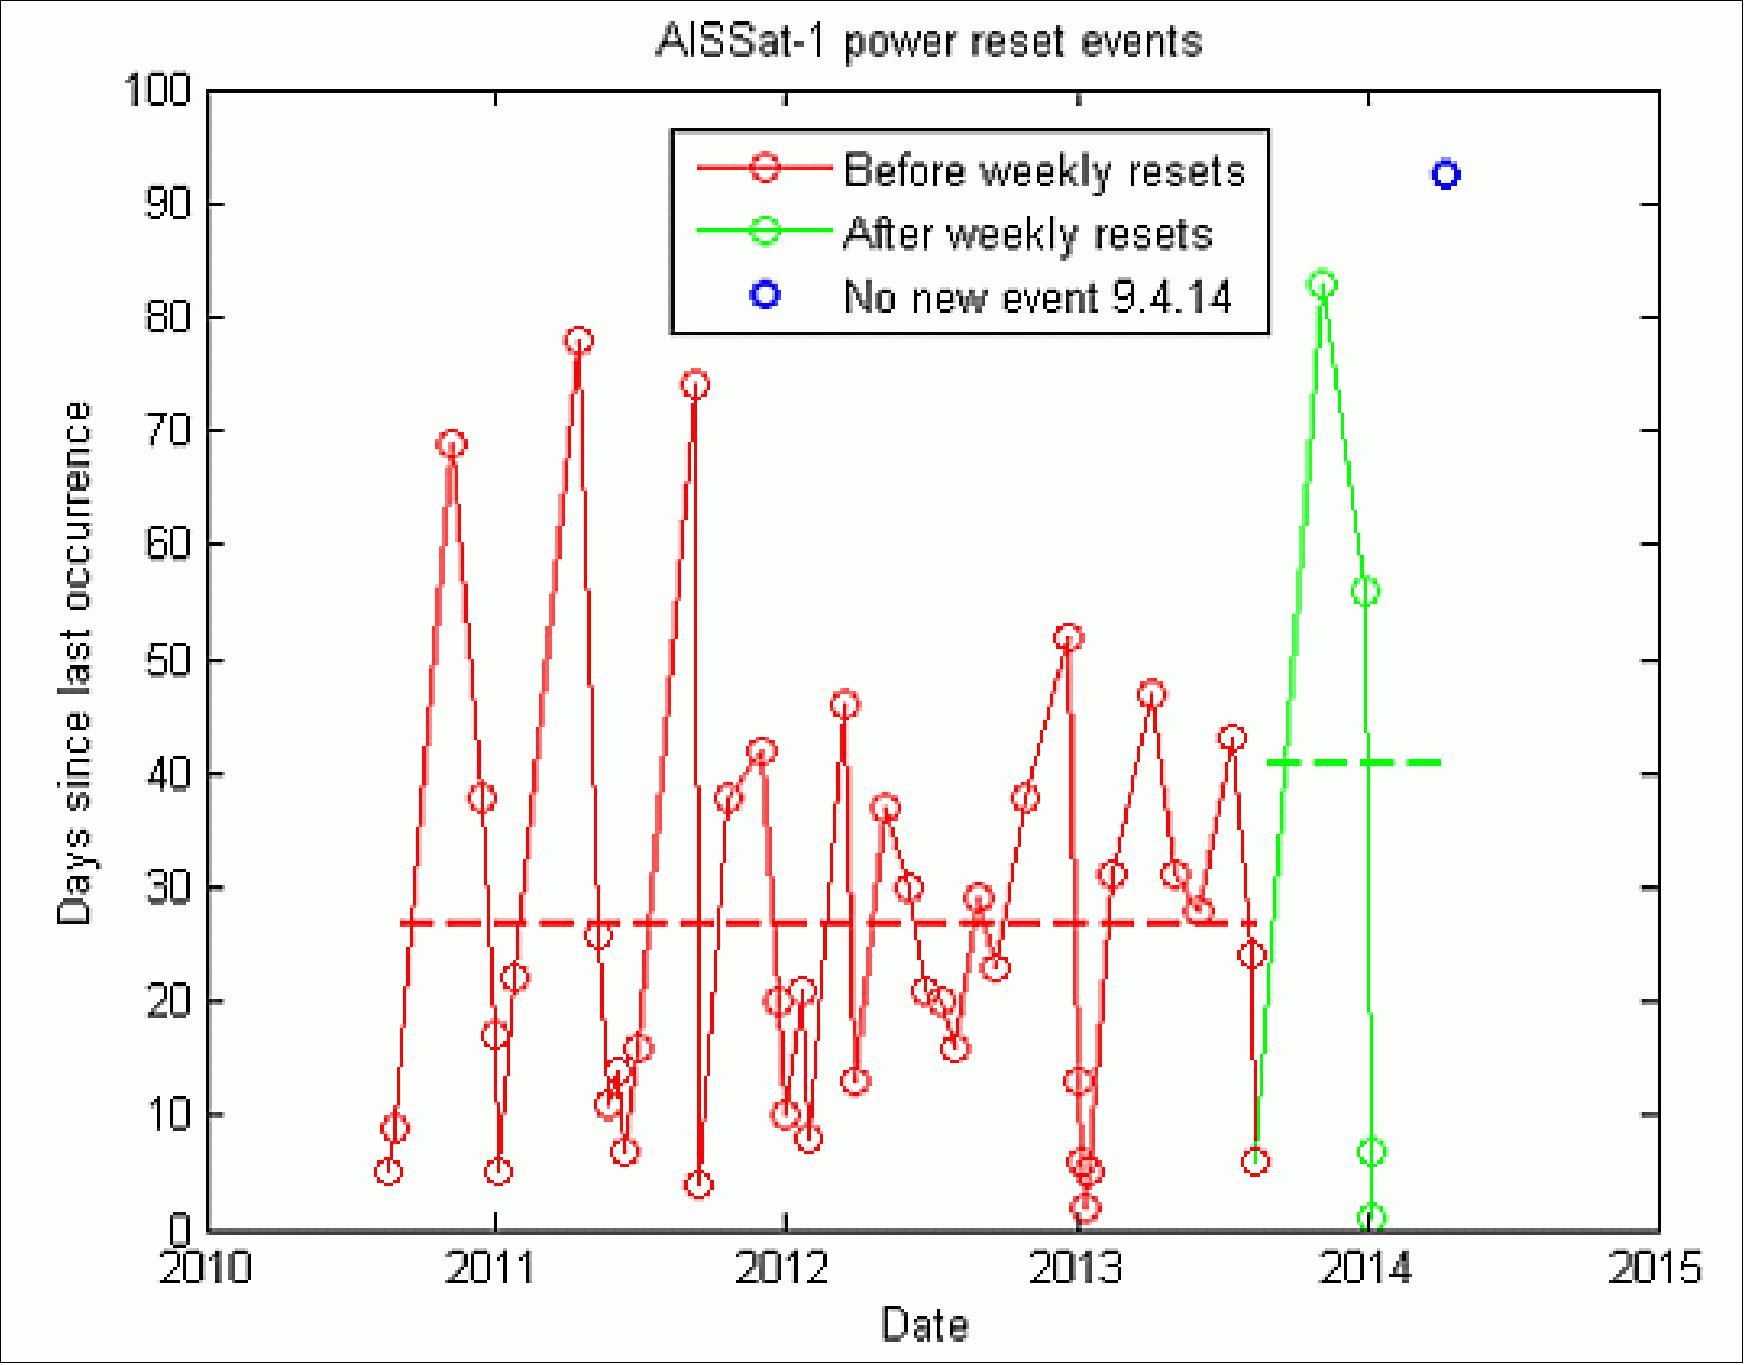 Figure 14: Time of power reset events and number of days since last event (image credit: FFI)